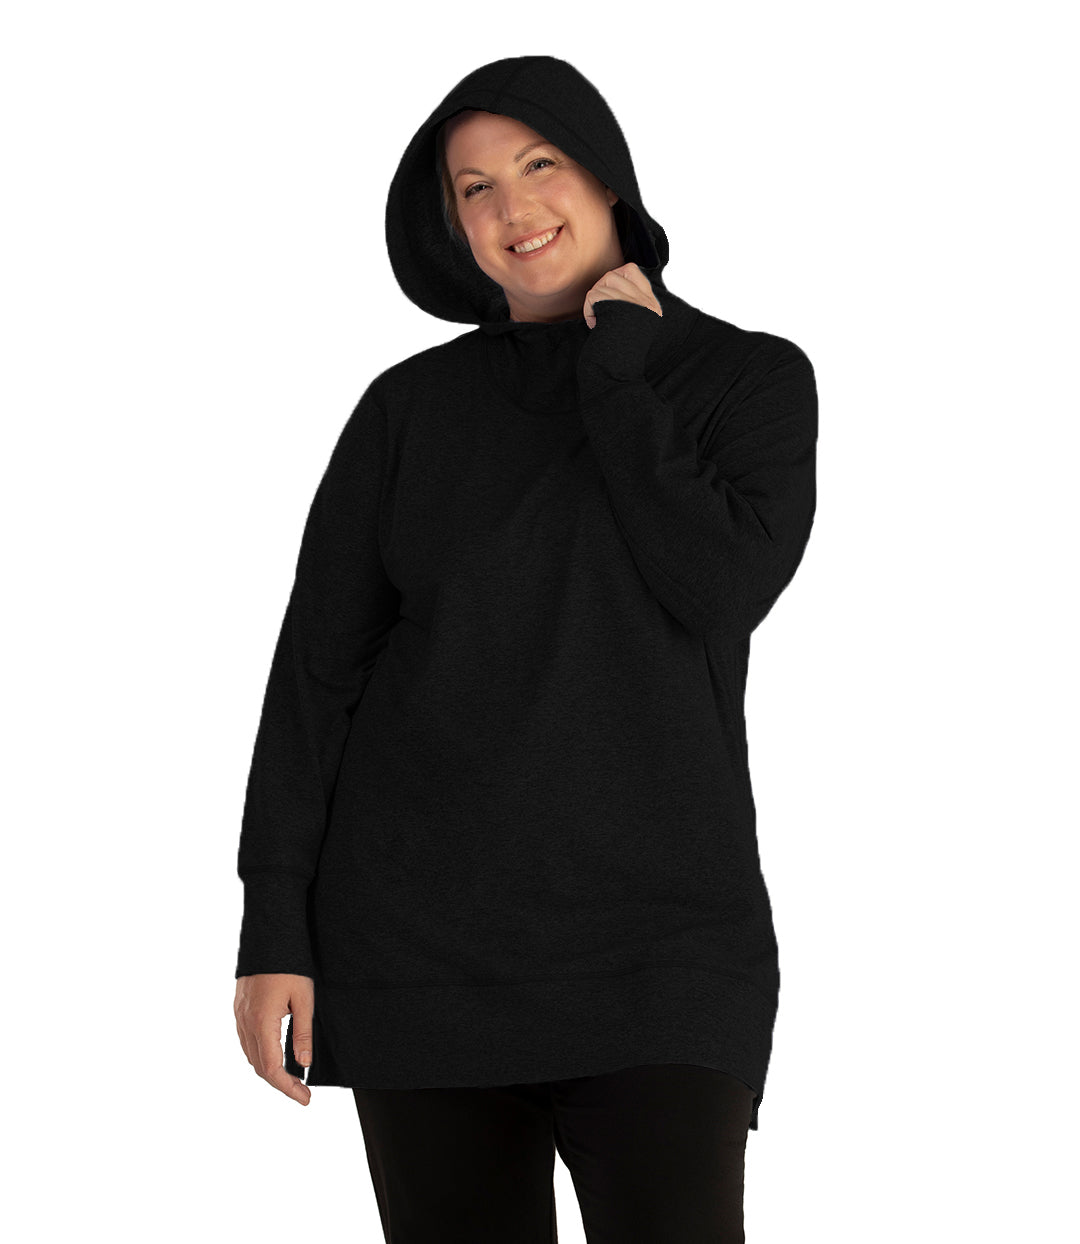 Plus size woman, facing front, wearing JunoActive plus size SoftWik Long Sleeve Hoodie in the color Black. She has the hood up on her head, covering her hair. She is wearing JunoActive Plus Size Leggings in the color Black.